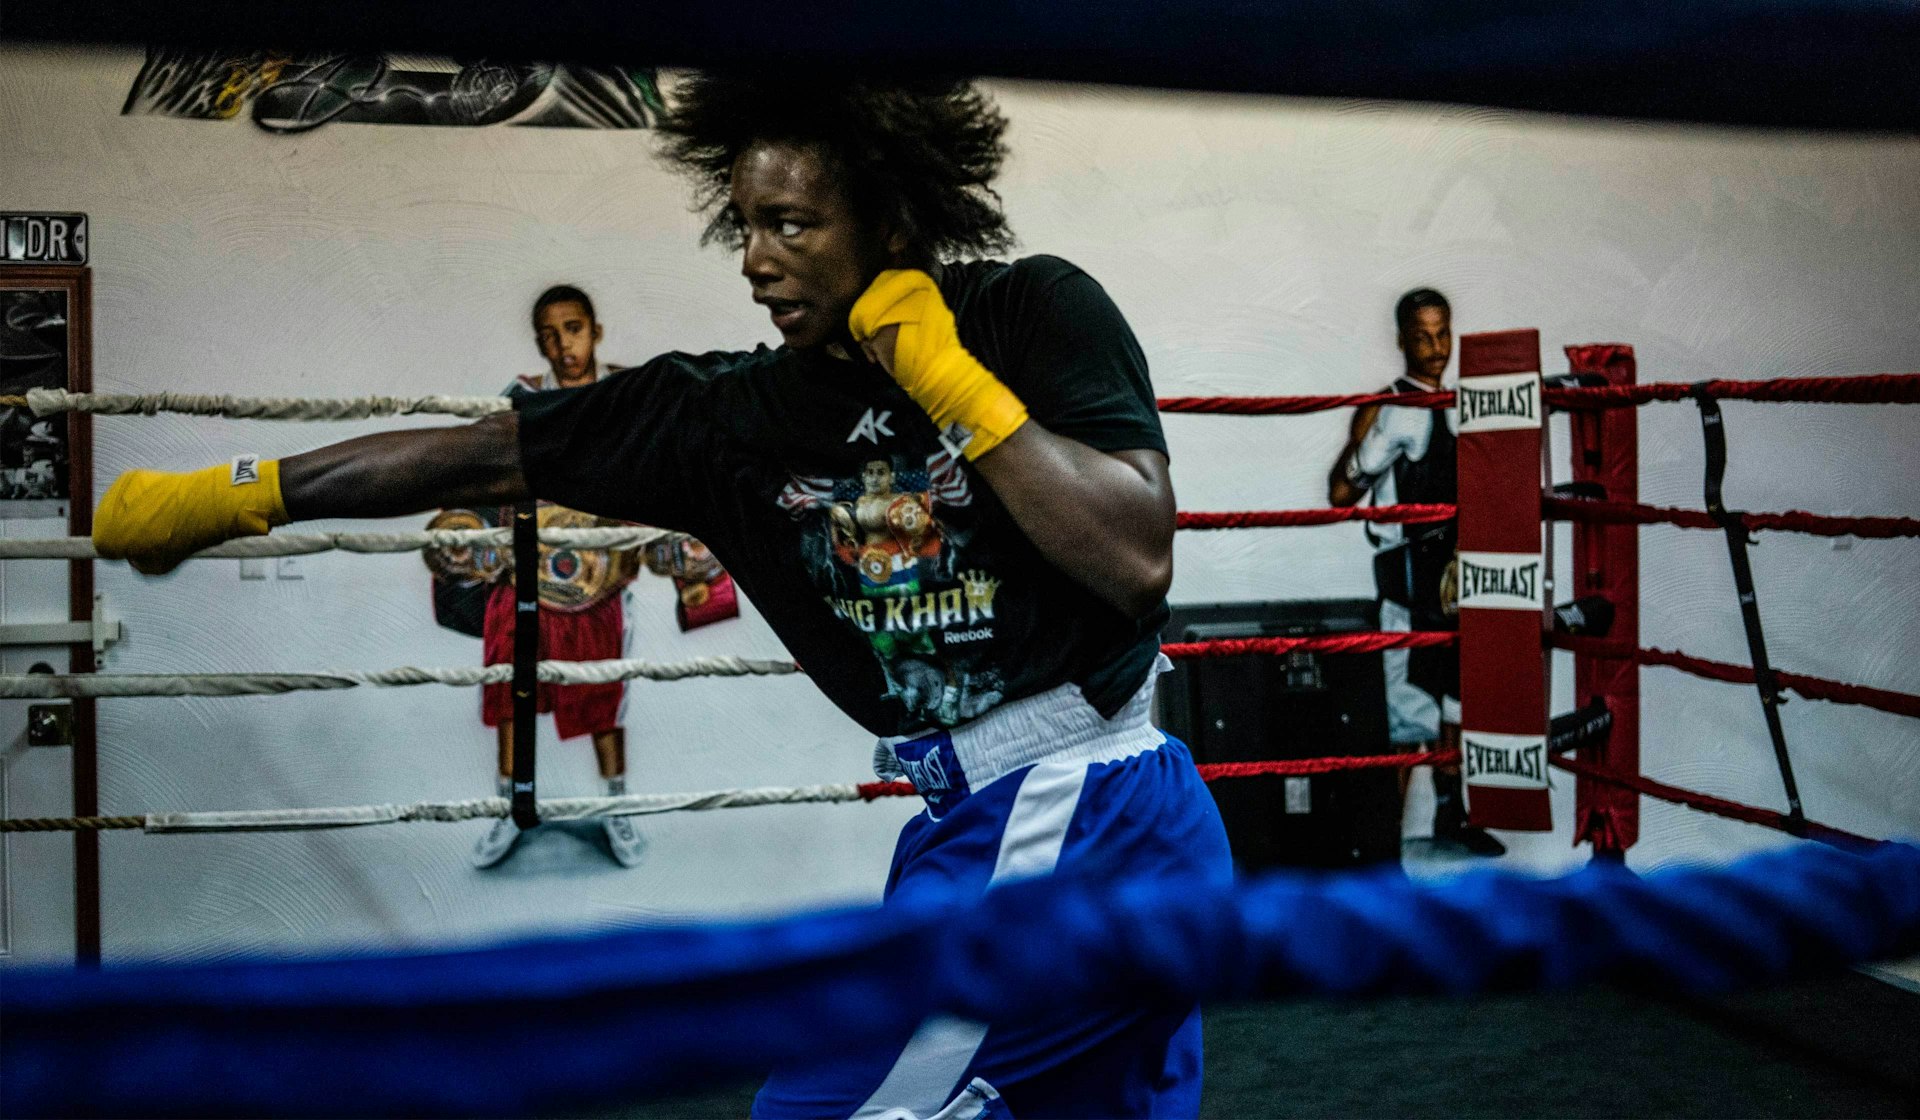 The world champion bringing women's boxing to the mainstream